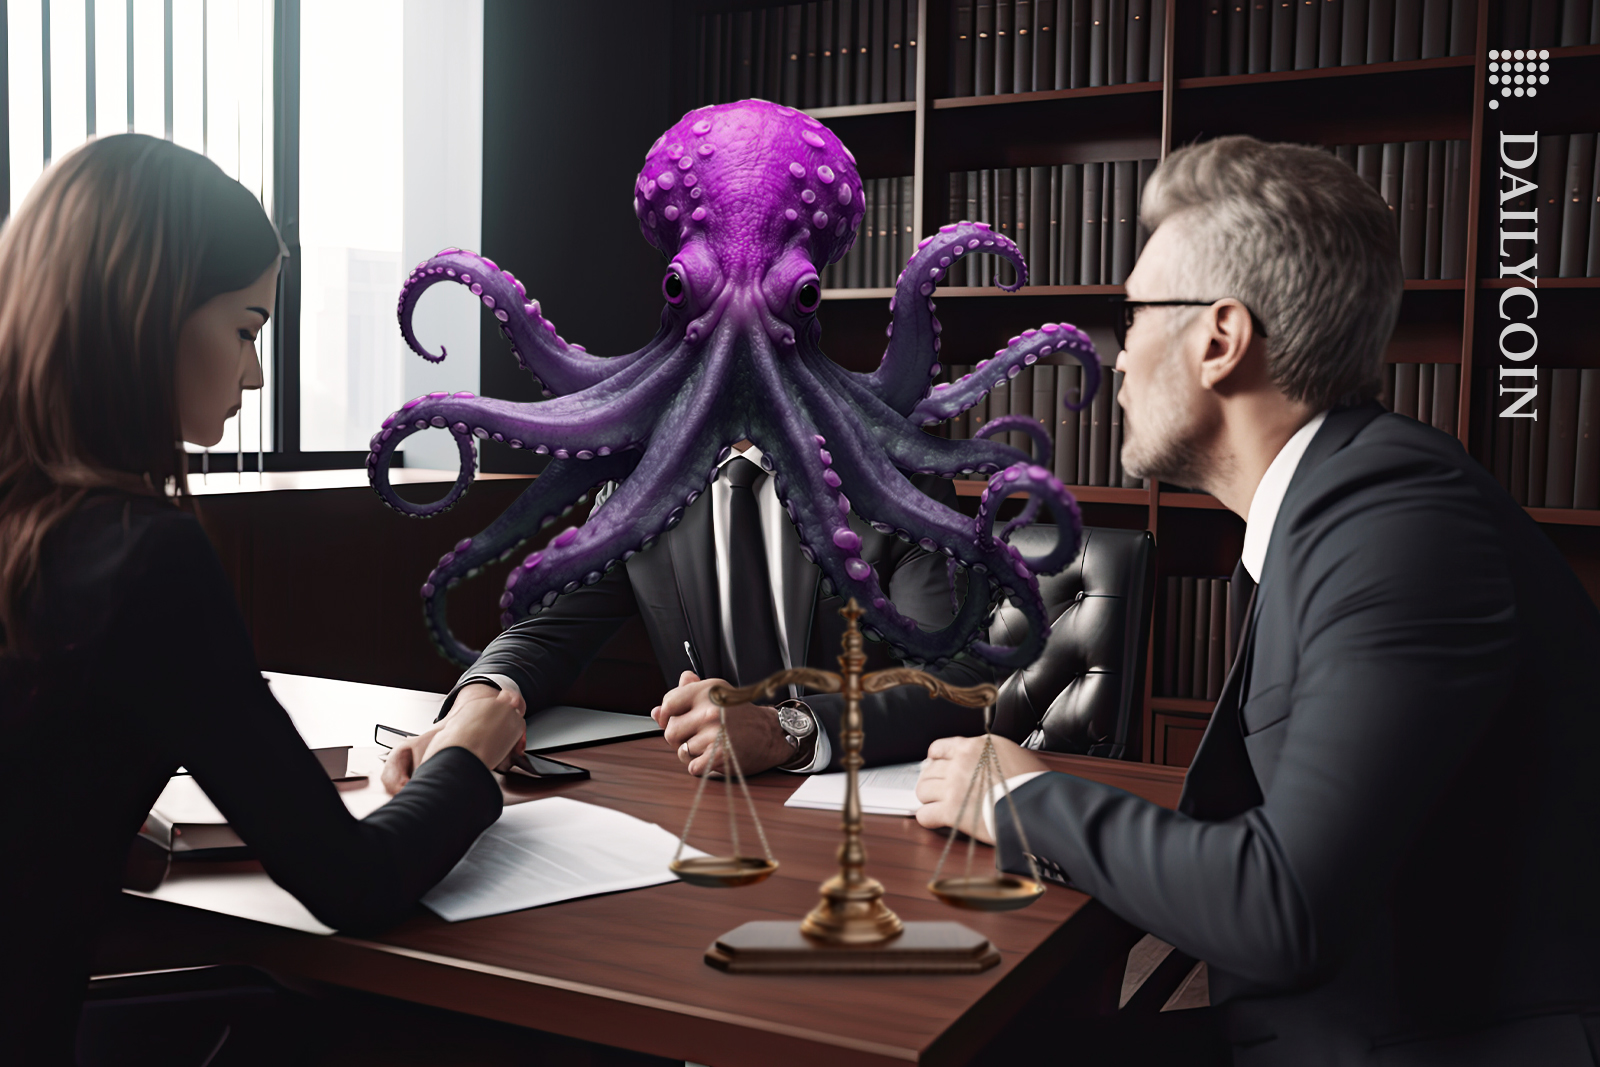 Kraken talking to his lawyers about the lawsuit.